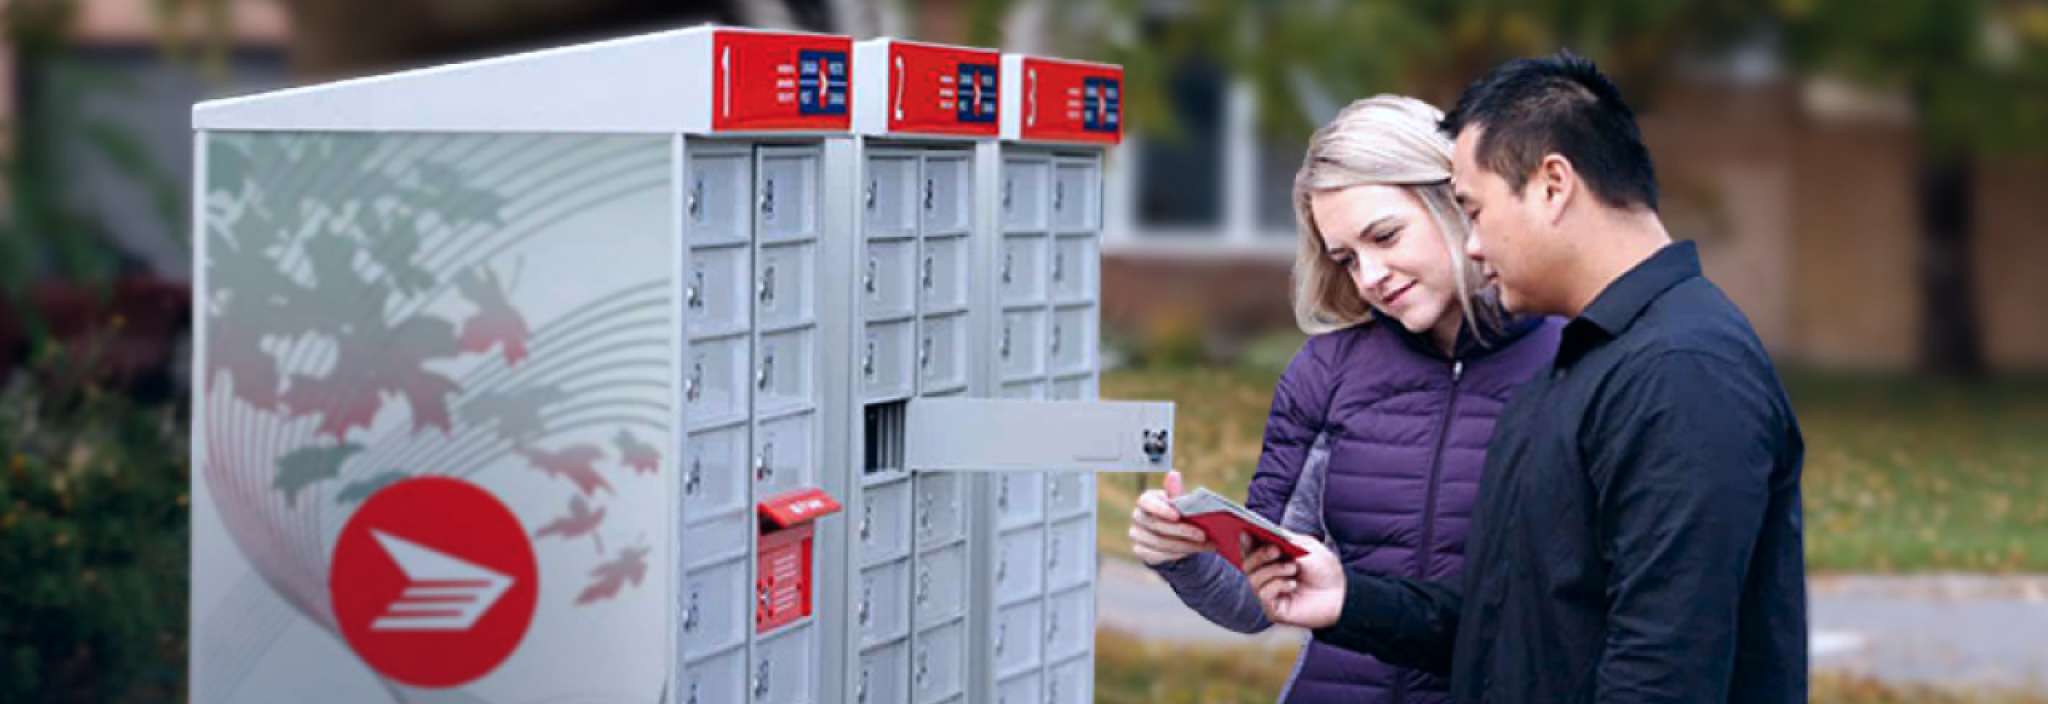 A couple retrieves their mail from a Canada Post community mailbox in a residential area.